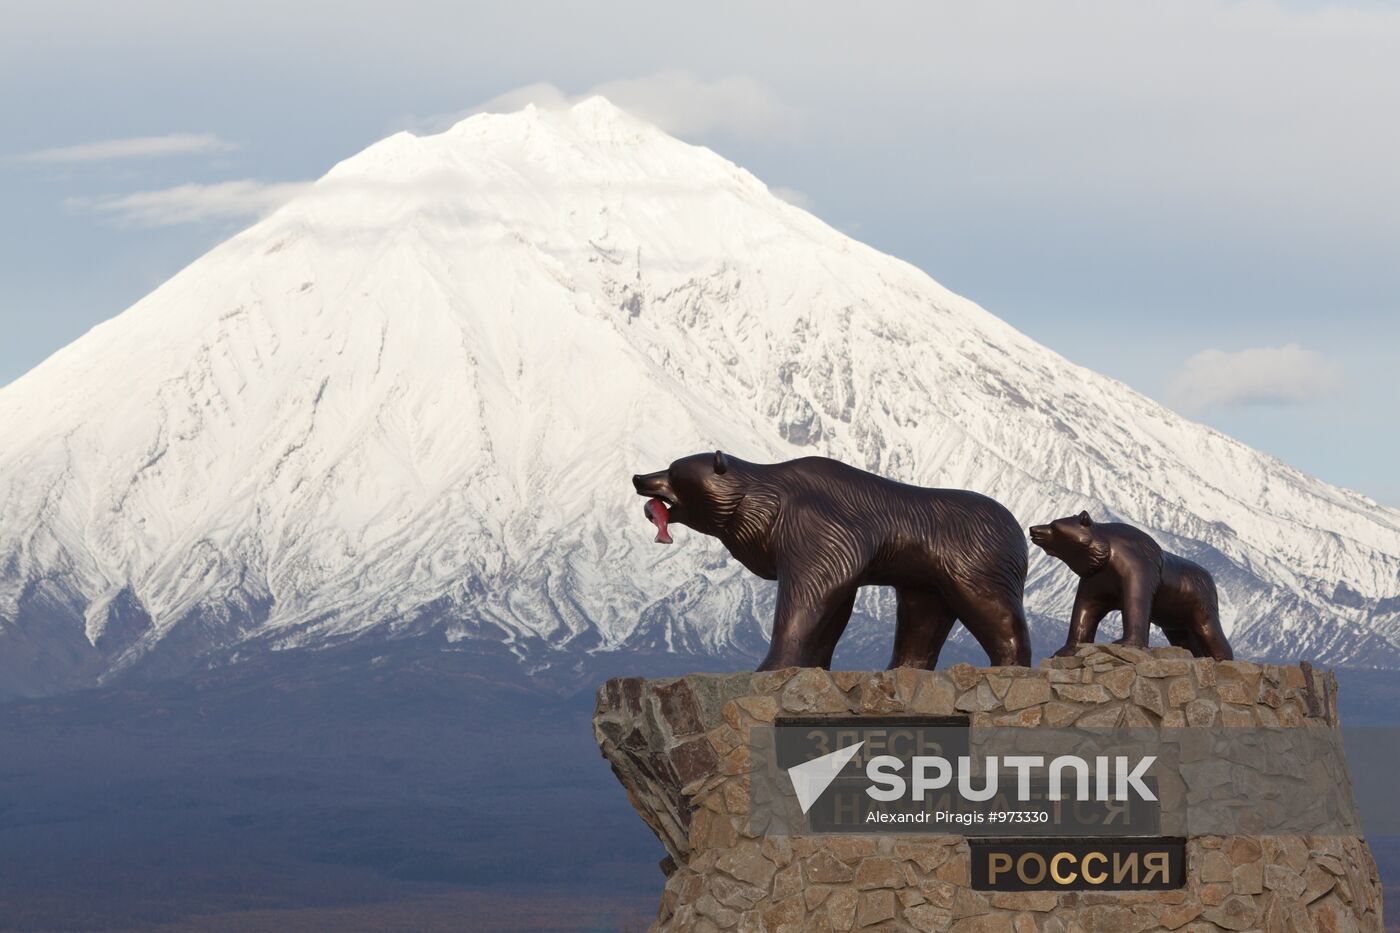 "She-bear with Cub" monument in Kamchatka Territory